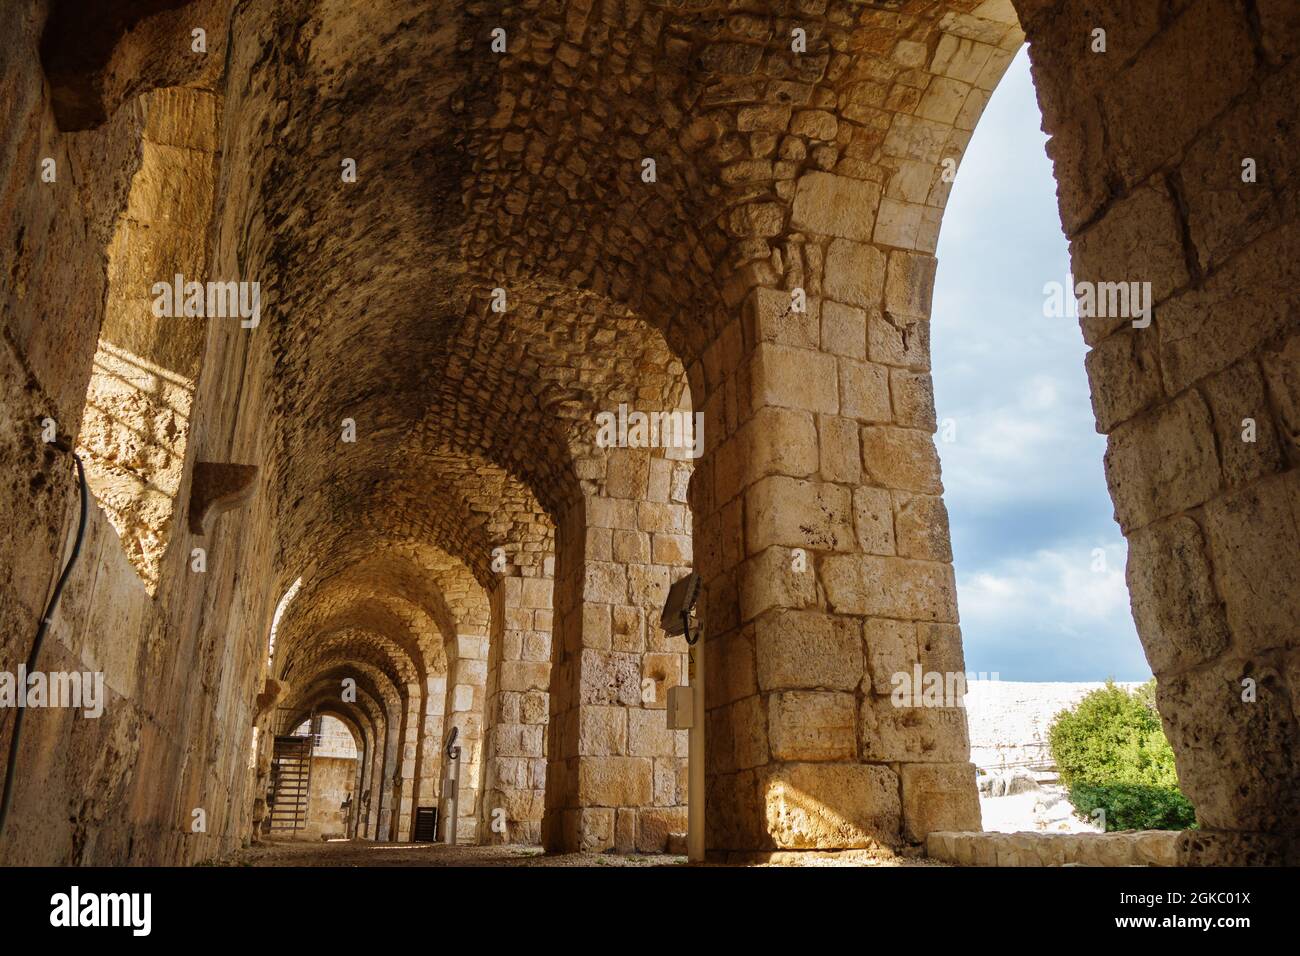 Passage inside of medieval castle Kizkalesi, near Kizkalesi, Turkey. There are stone arch colonnade & embrasure. Fort was founded in antiquity by pira Stock Photo